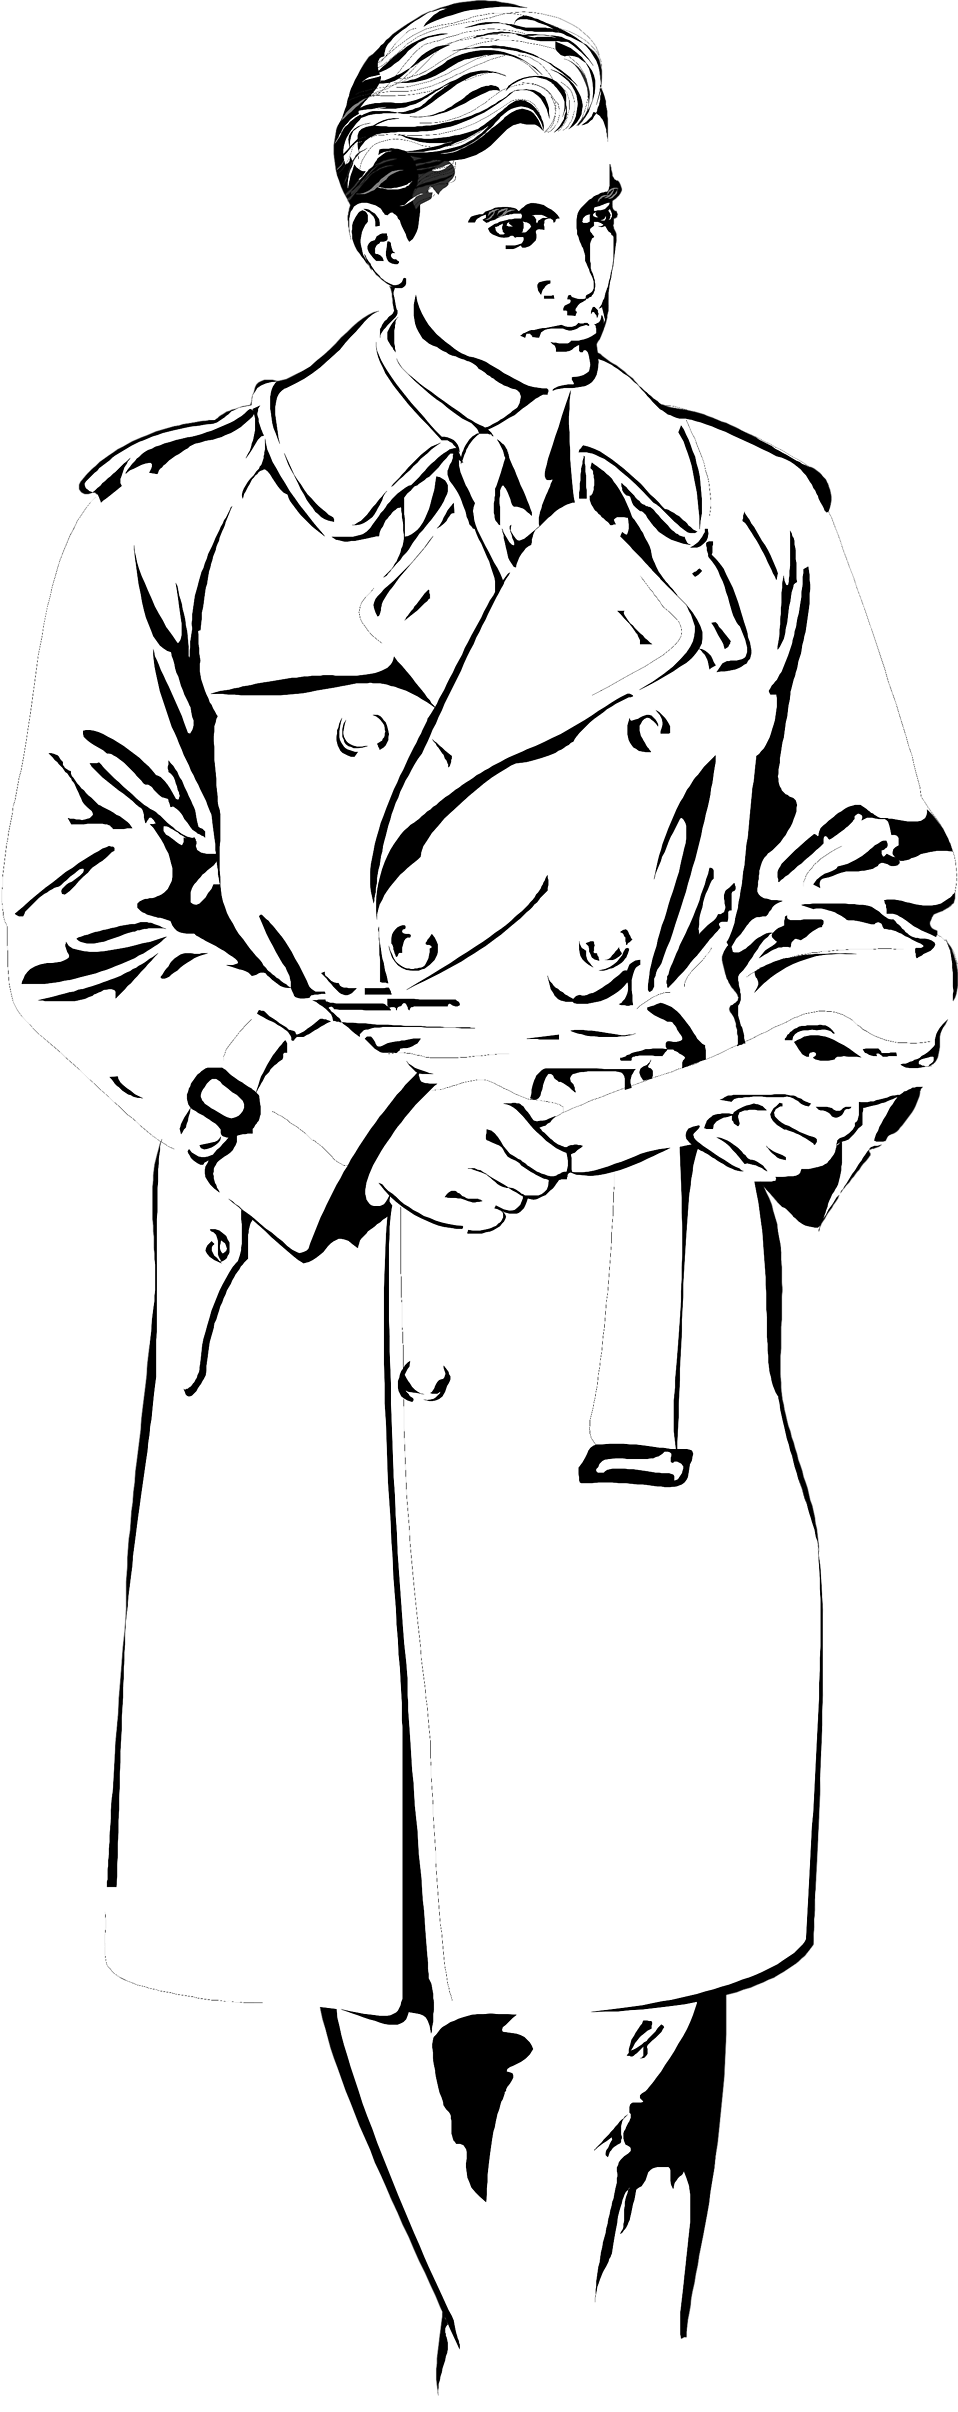 Illustration of a handsome man in a rain coat.